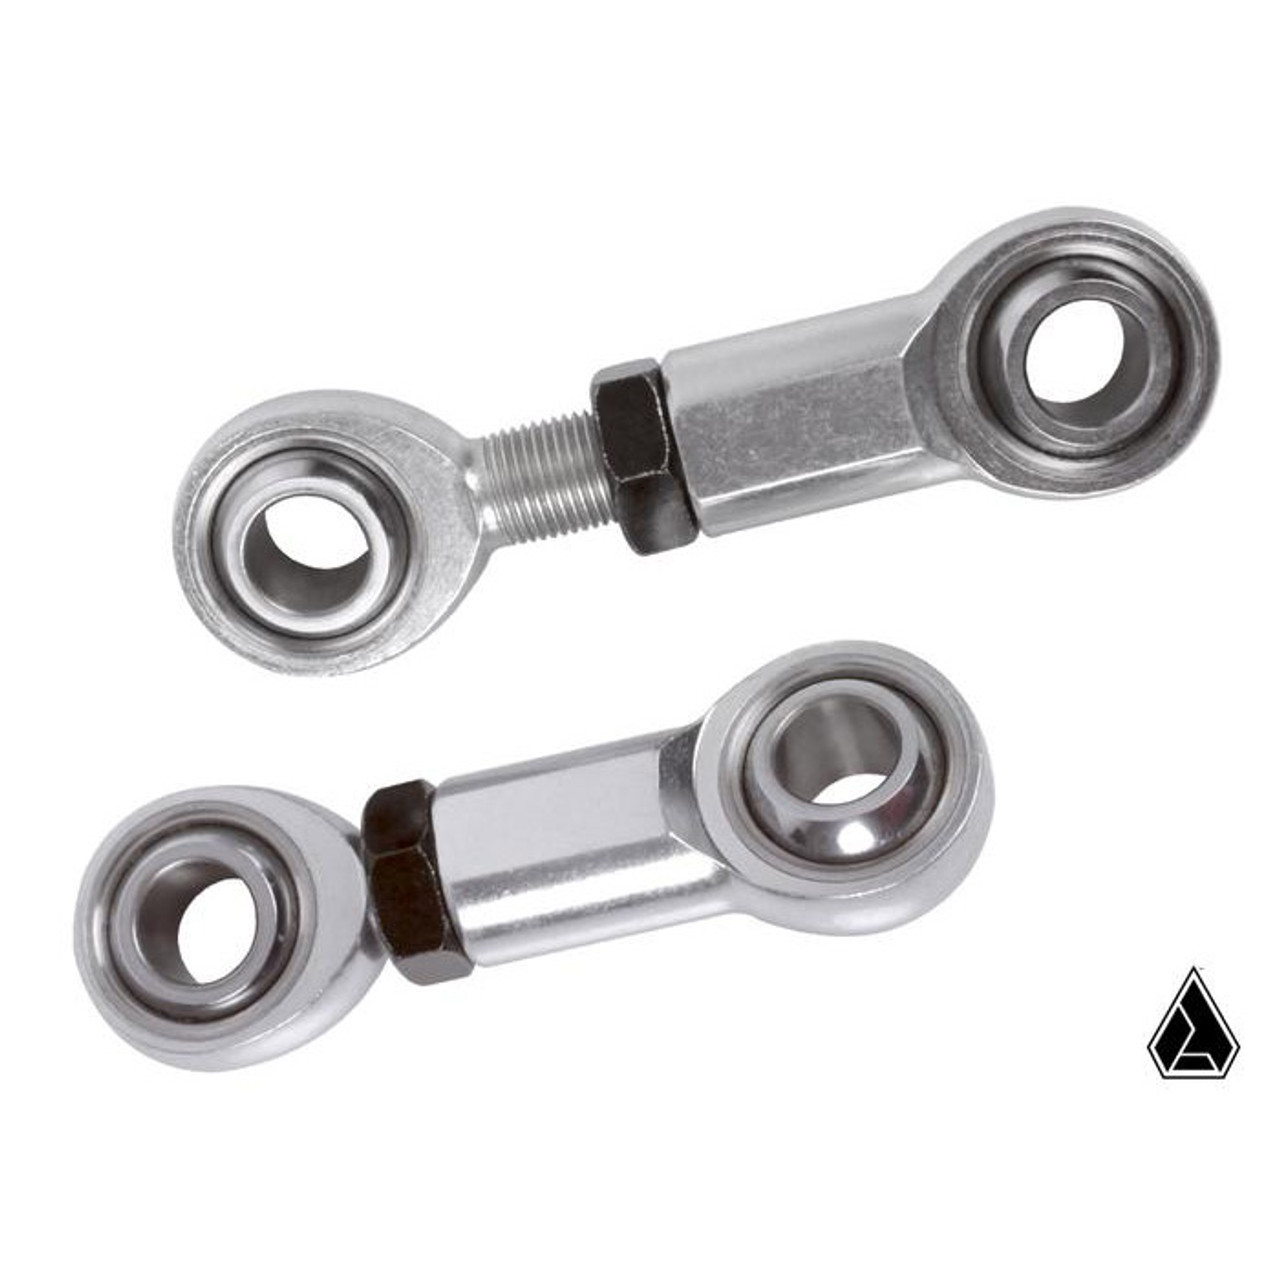 Assault Industries Heavy Duty Front Sway Bar End Links (Fits: Can-Am Maverick X3) additional image 2